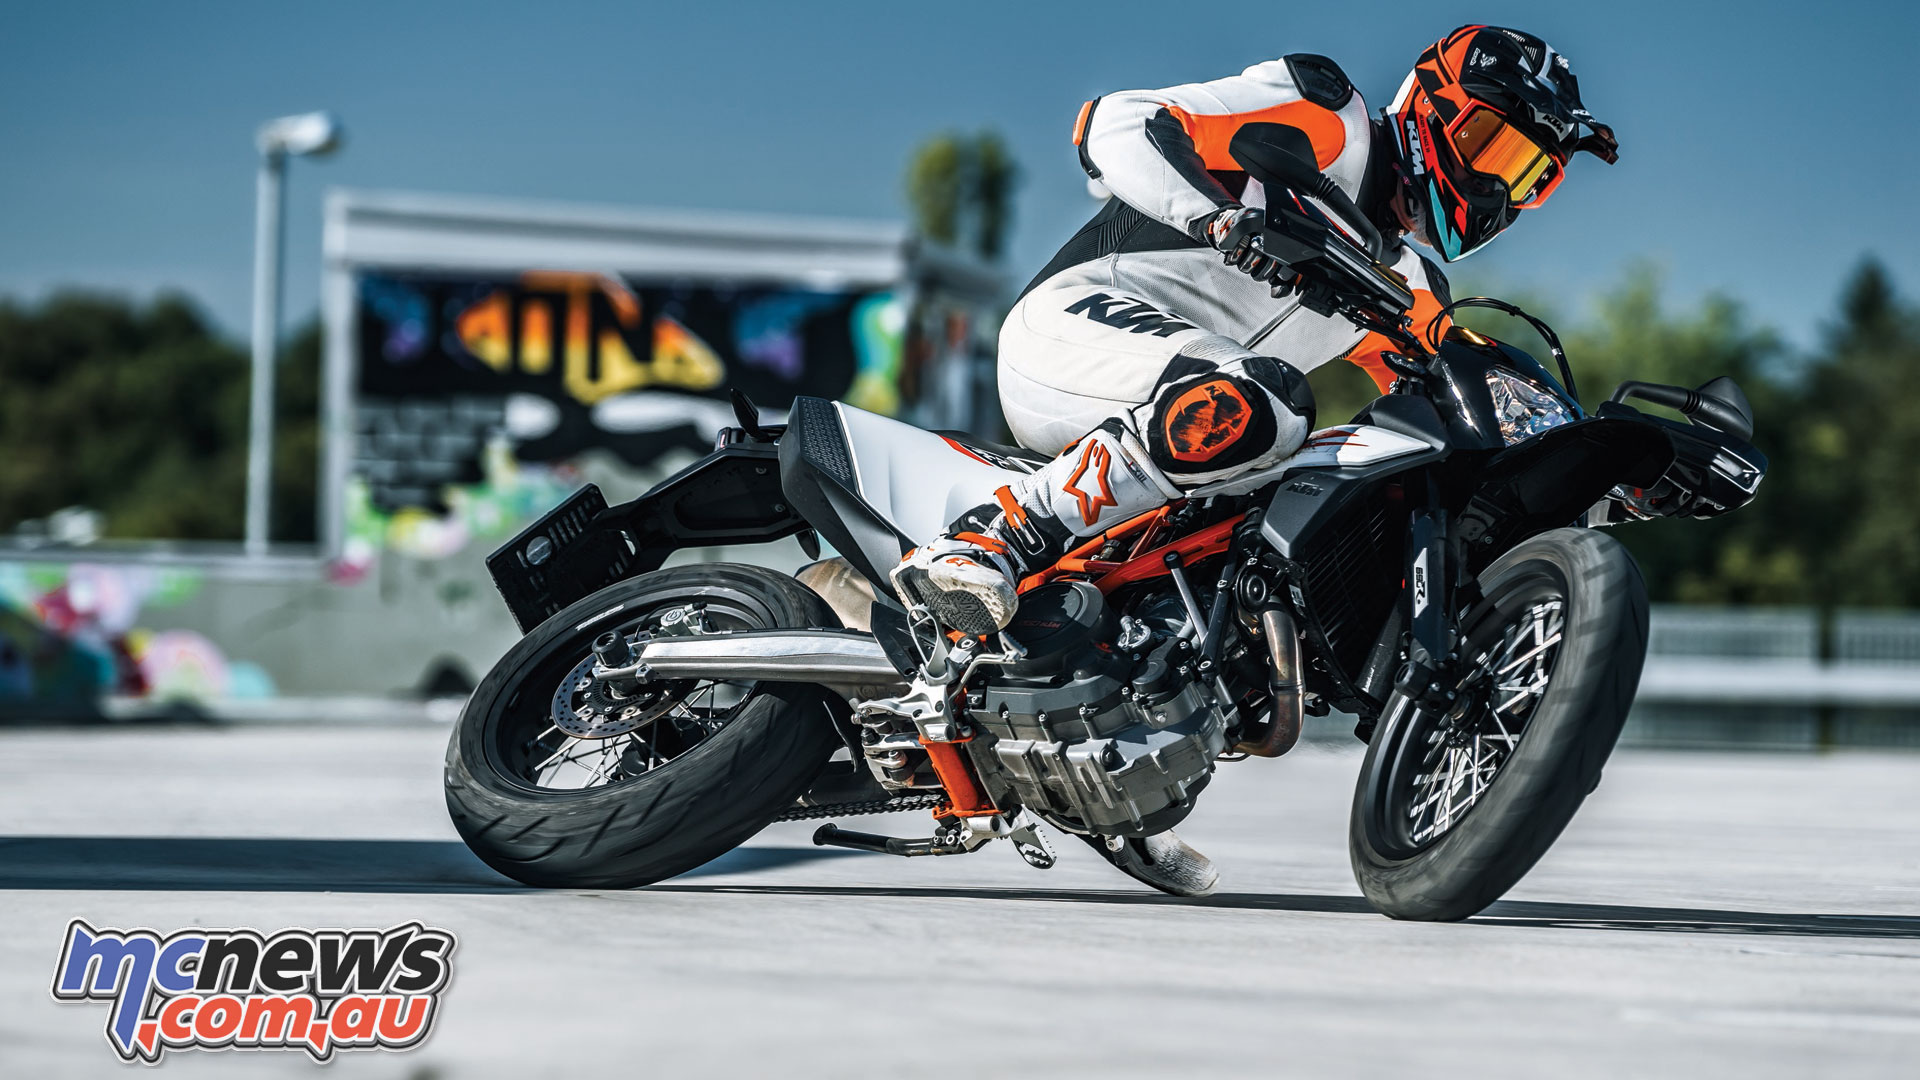 19 Ktm 690 Smc R Upgraded Engine And Suspension Motorcycle News Sport And Reviews